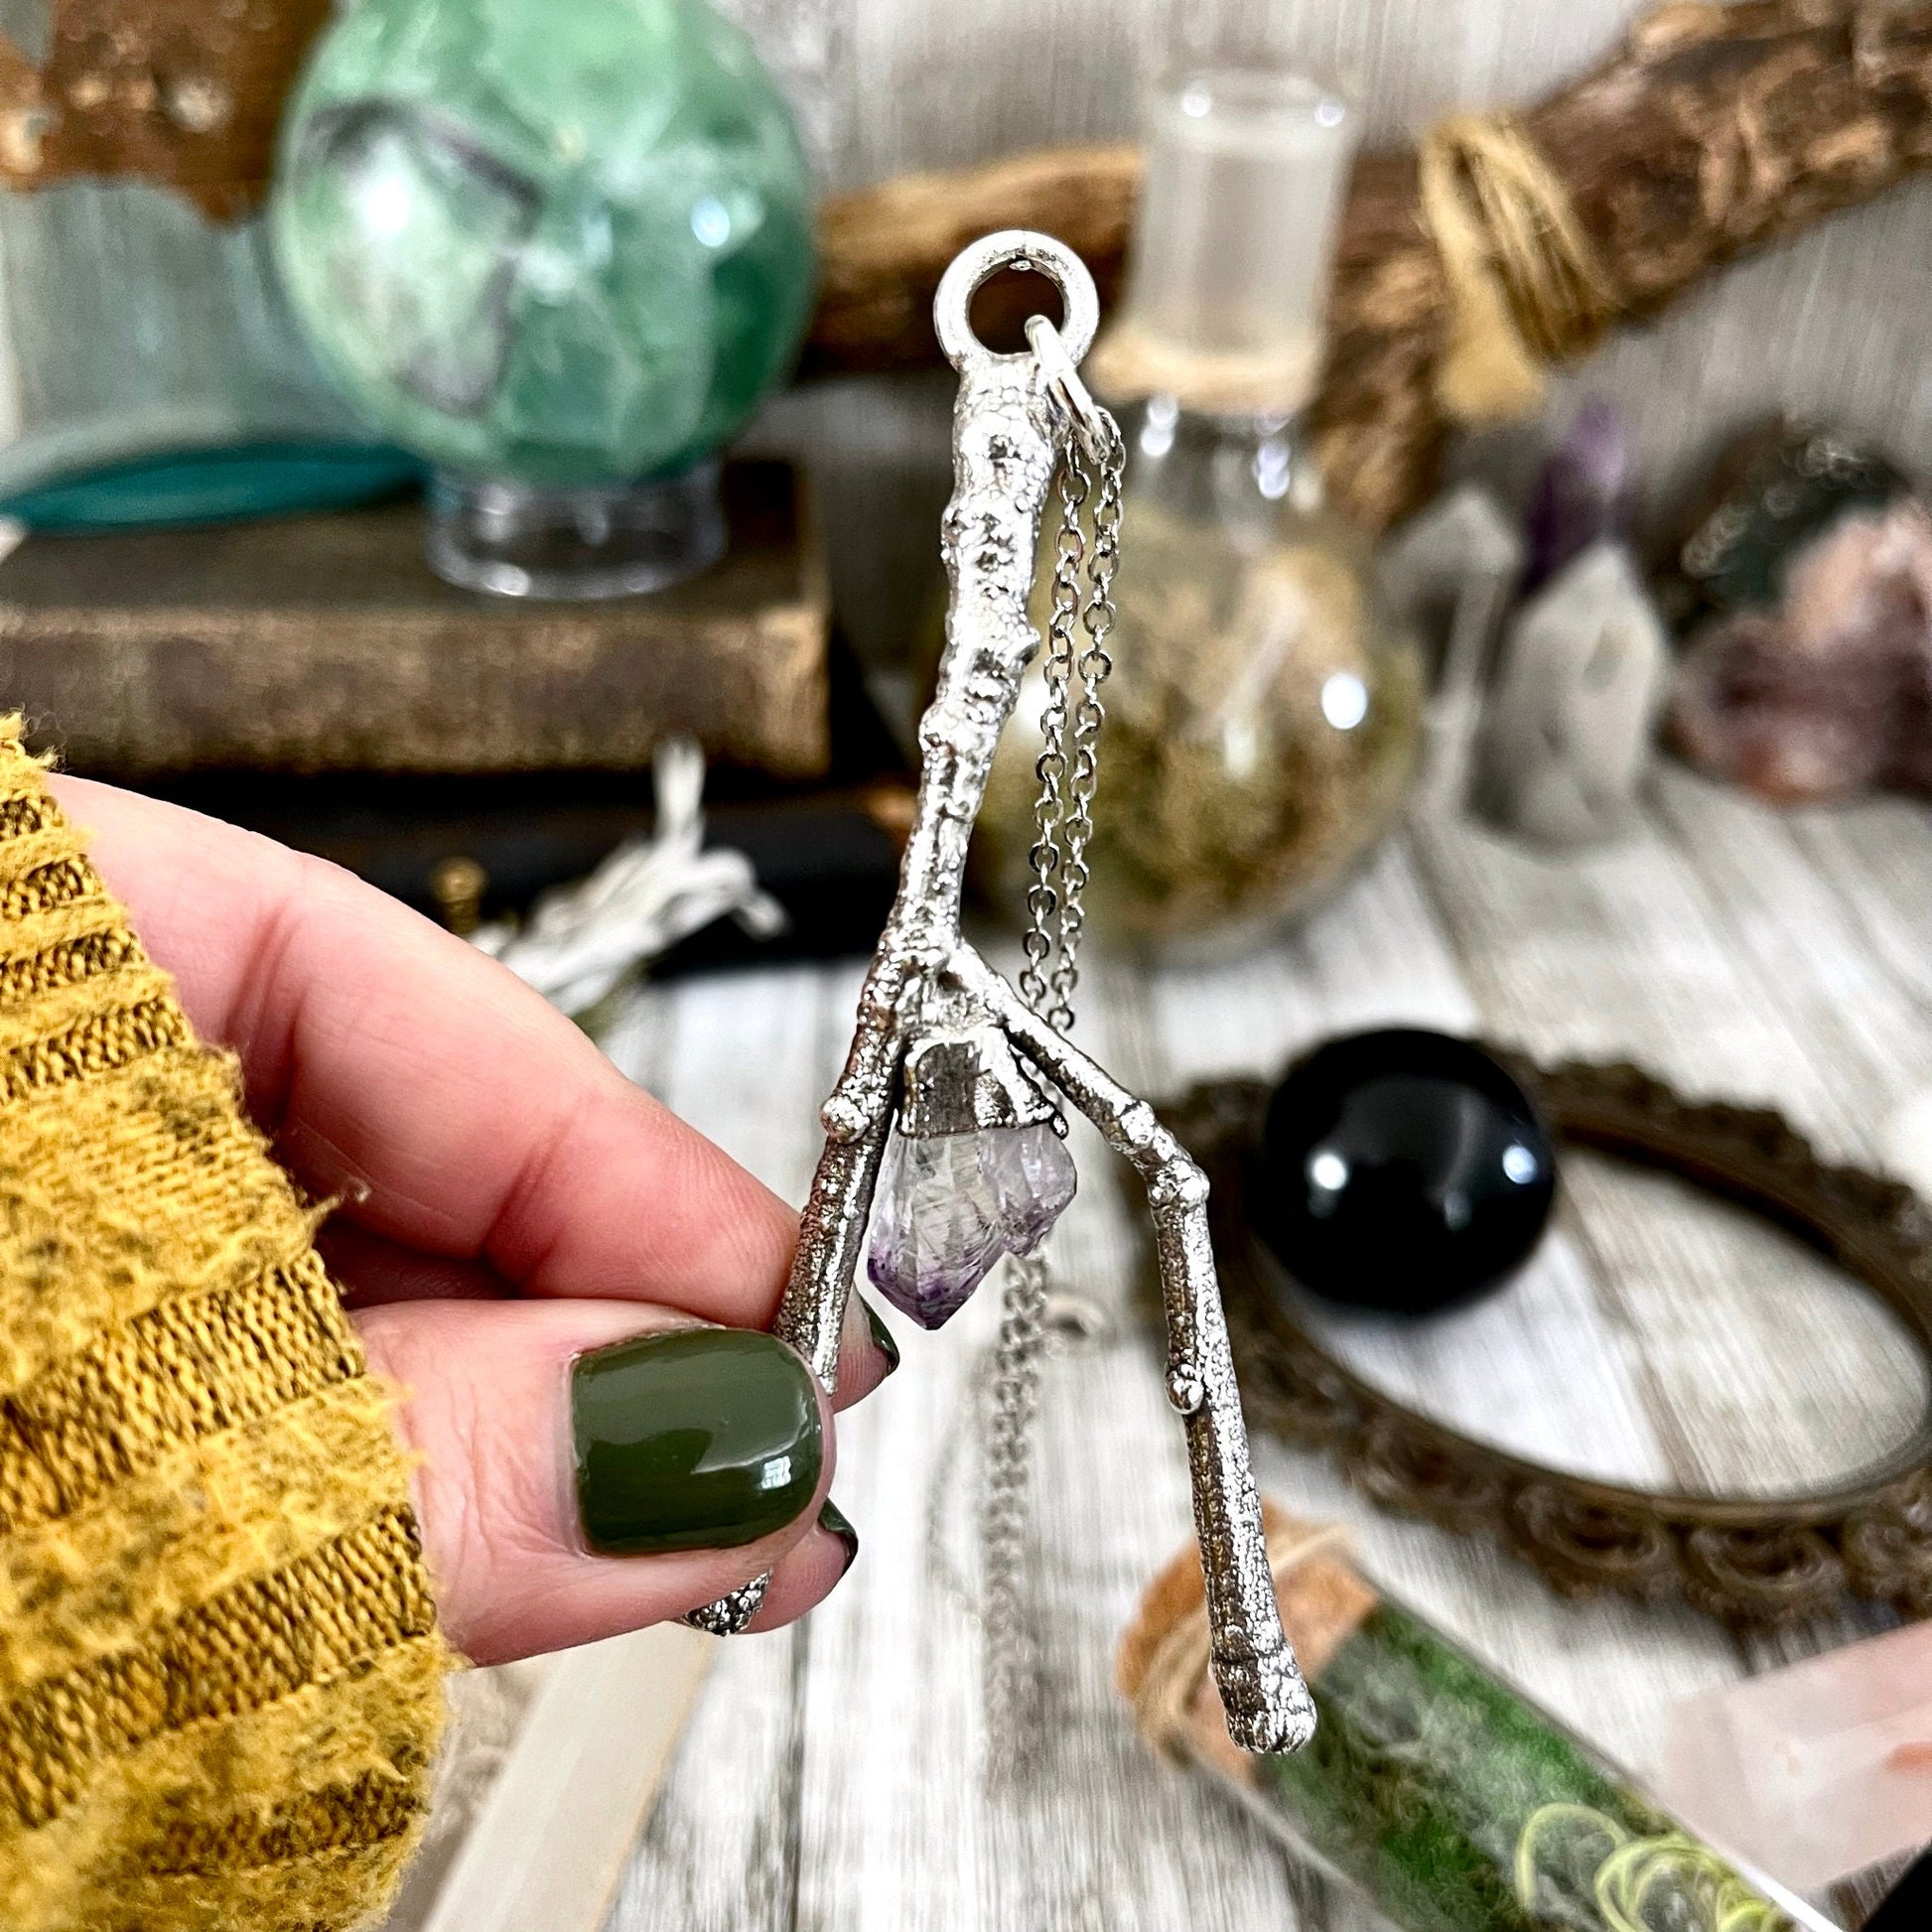 big crystal Necklace, Big Gothic Necklace, Bohemian Jewelry, Crystal Necklaces, Crystal Pendant, Etsy ID: 1587030930, FOXLARK- NECKLACES, Jewelry, nature inspired, Necklaces, Silver Jewelry, Silver Necklace, Silver Stone Jewelry, Statement Necklace, Stone